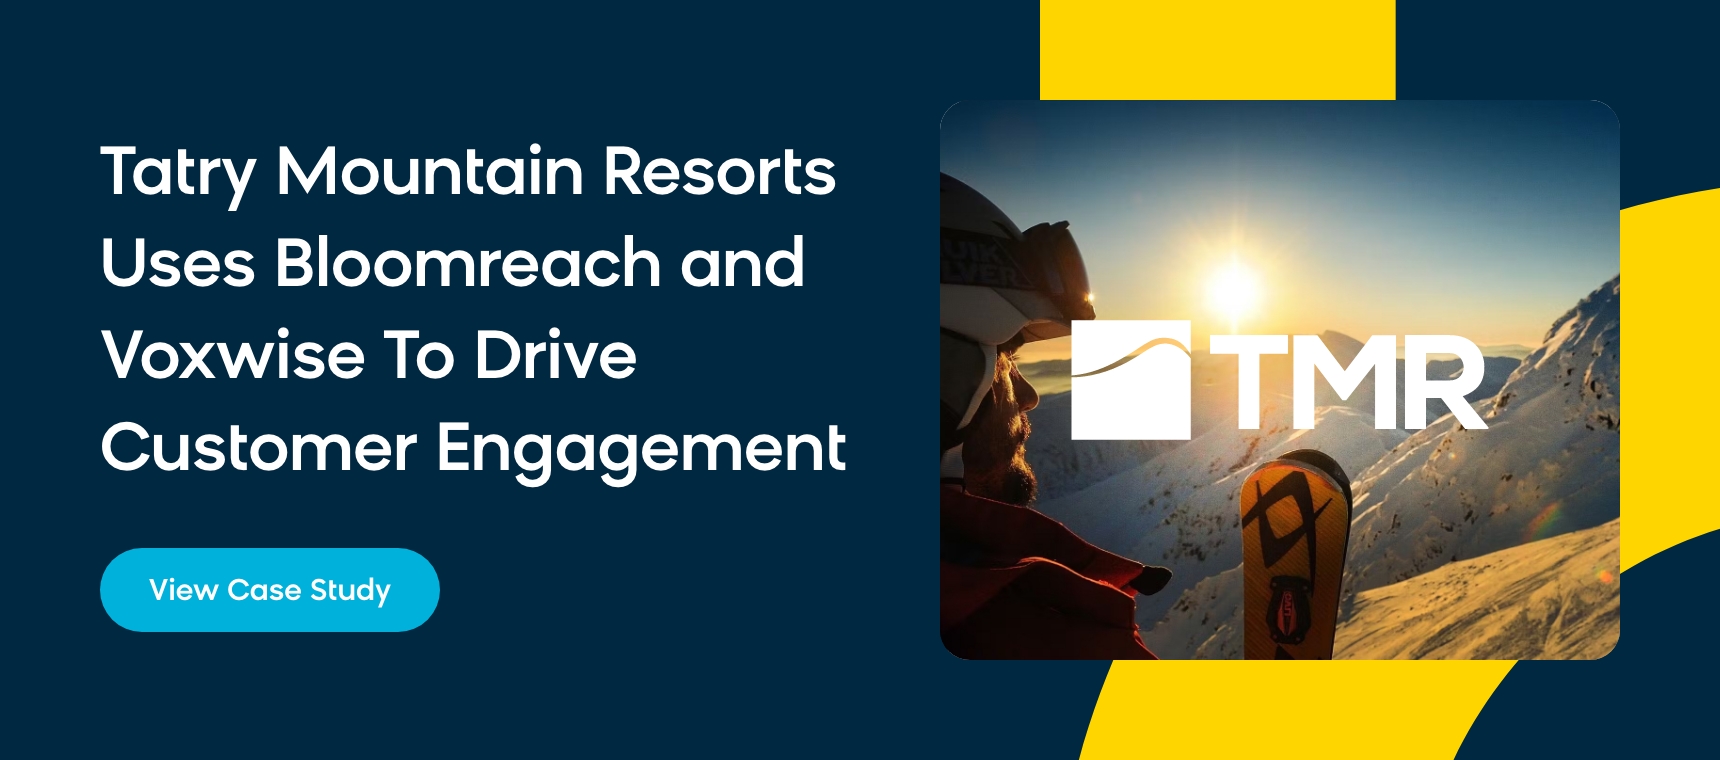 Tatry Mountain Resorts case study with Bloomreach